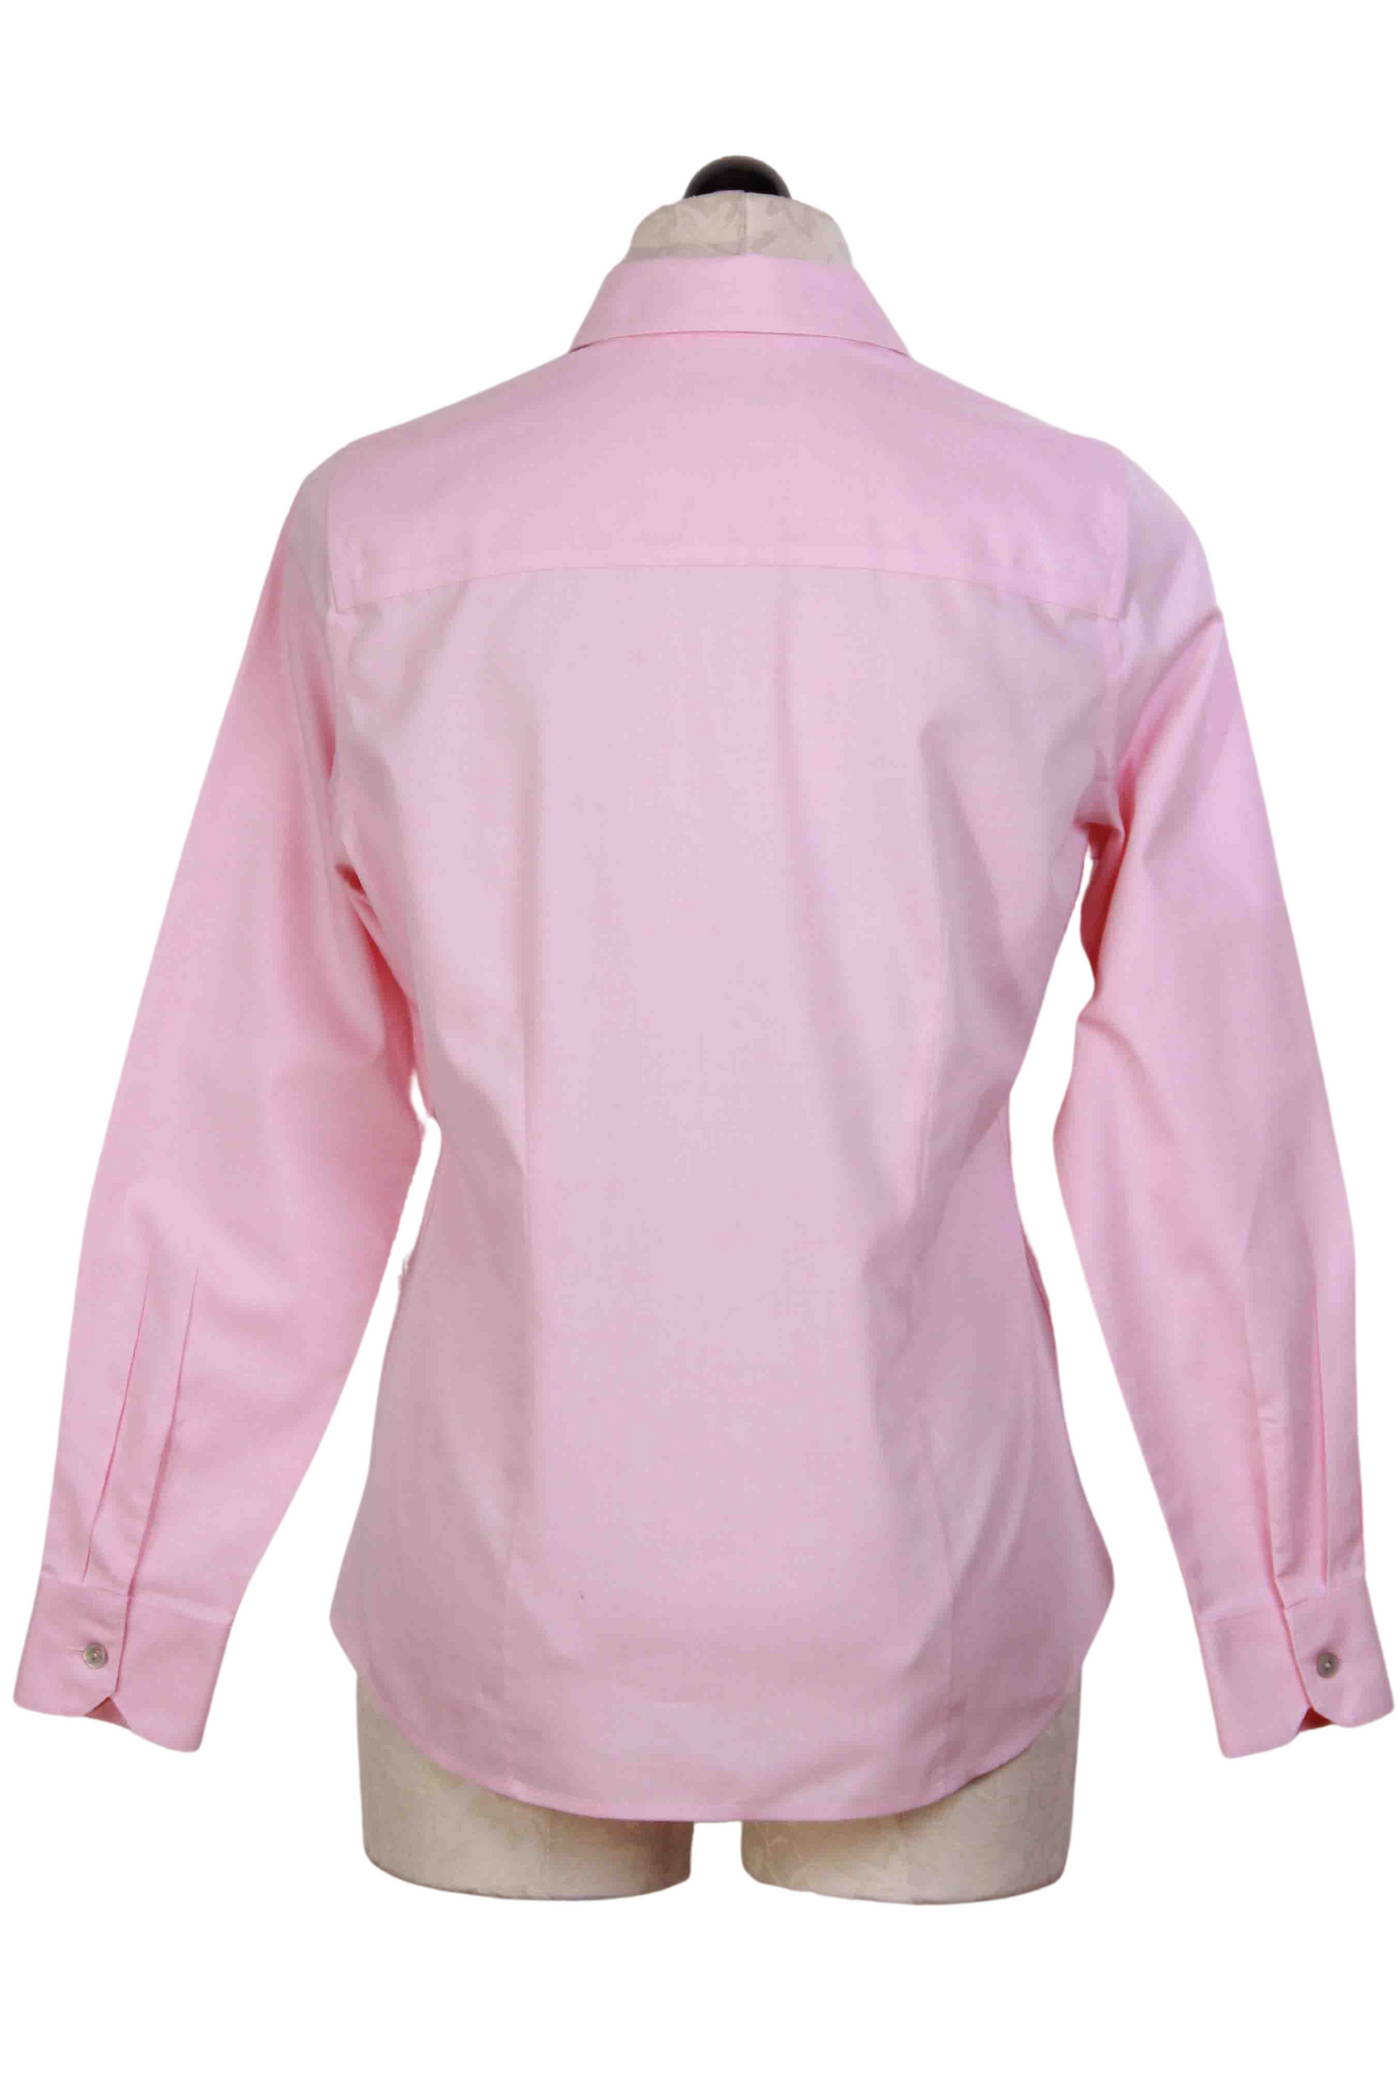 back view of Chambray Pink Classic collared, tailored Dianna blouse by Foxcroft